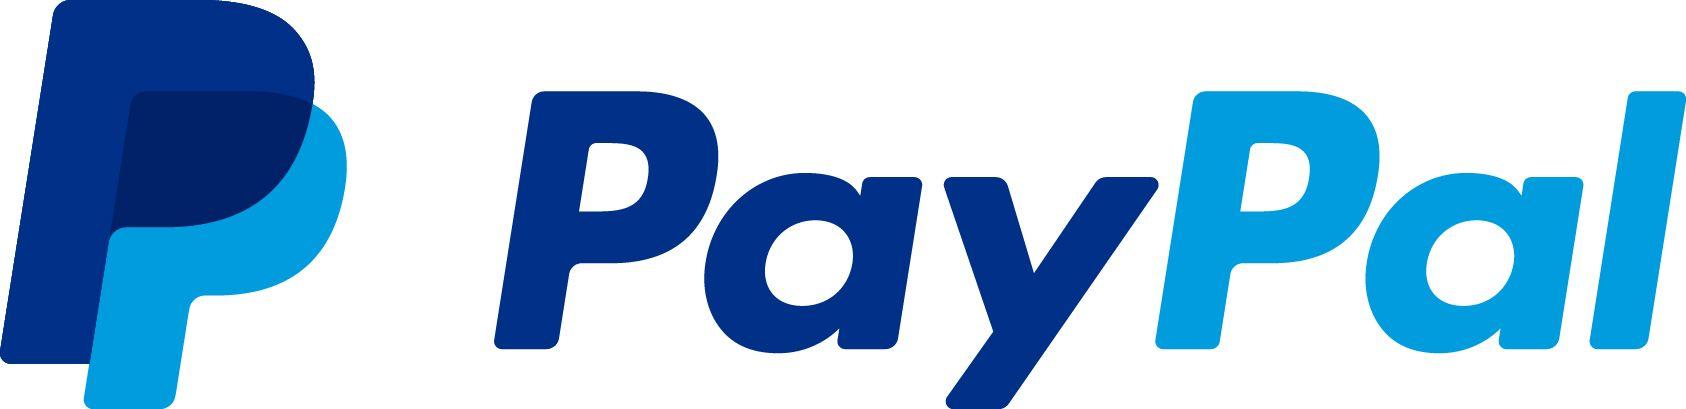 PayPal 2018 Logo - Media Resources - PayPal Stories